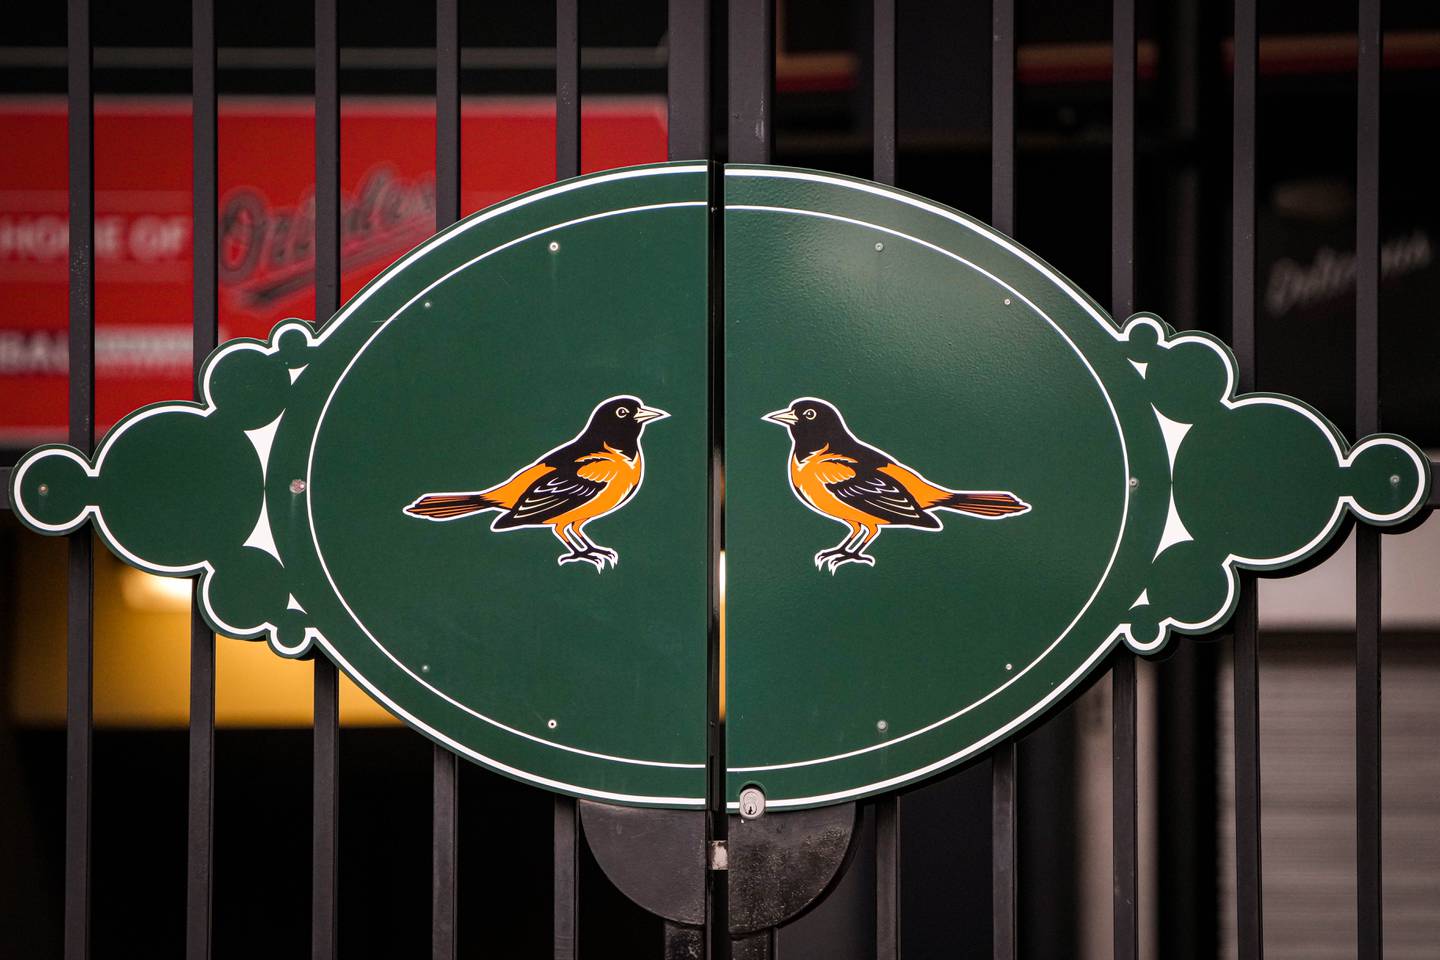 Exterior details of Orioles Park at Camden Yards in Baltimore on 2/2/23.